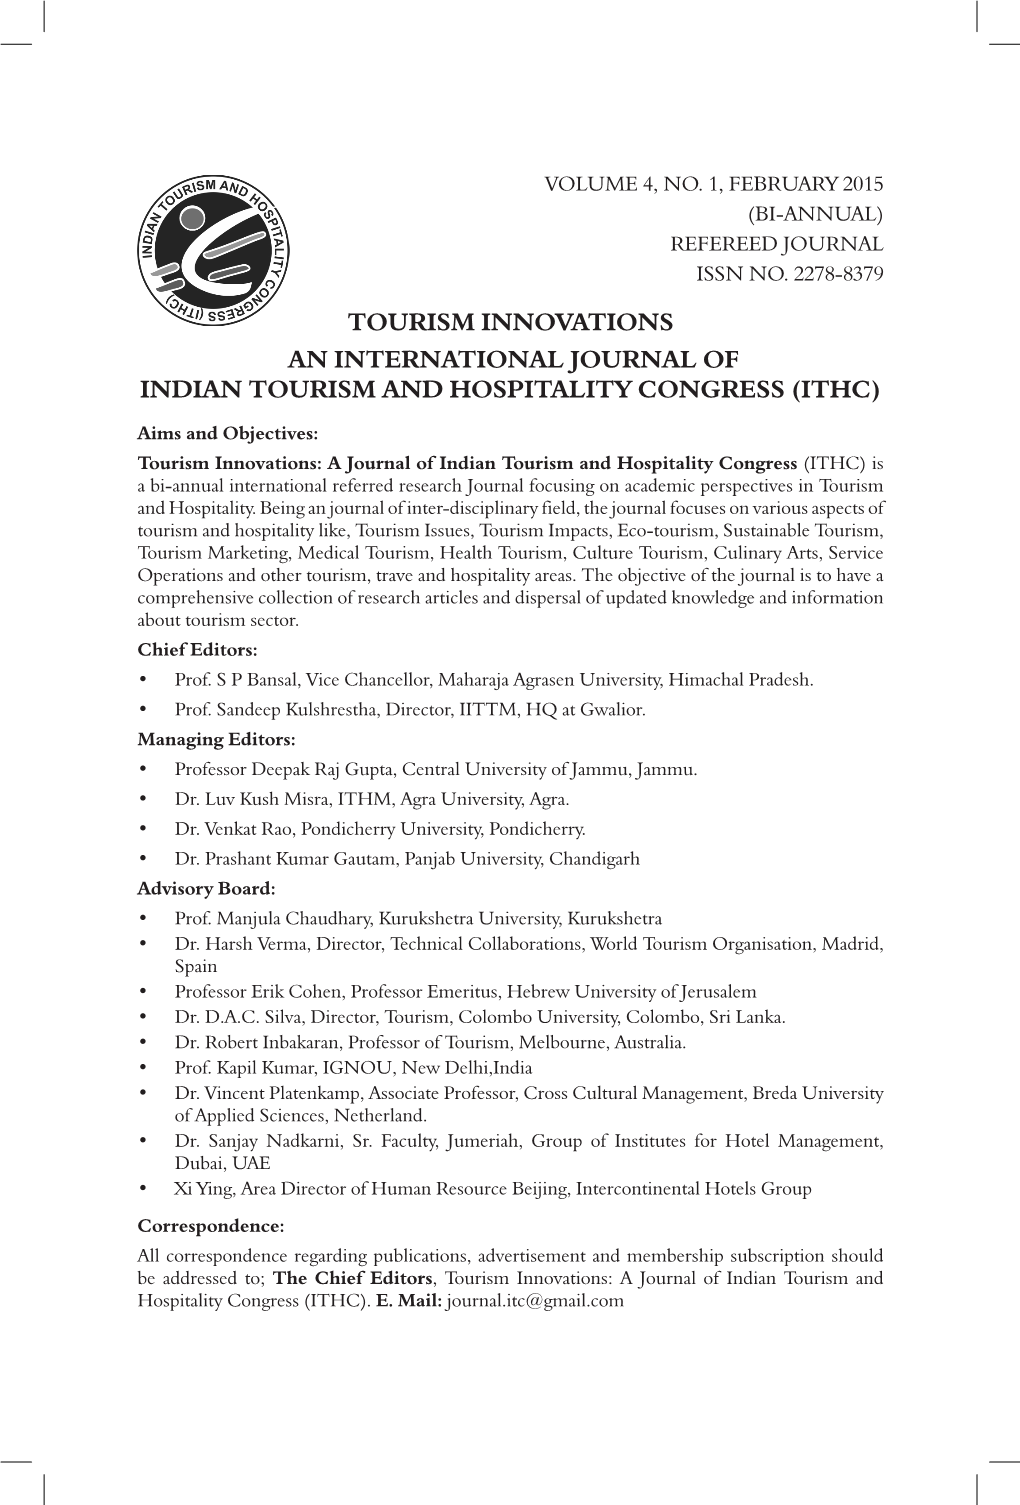 Tourism Innovations an International Journal of Indian Tourism and Hospitality Congress (Ithc)